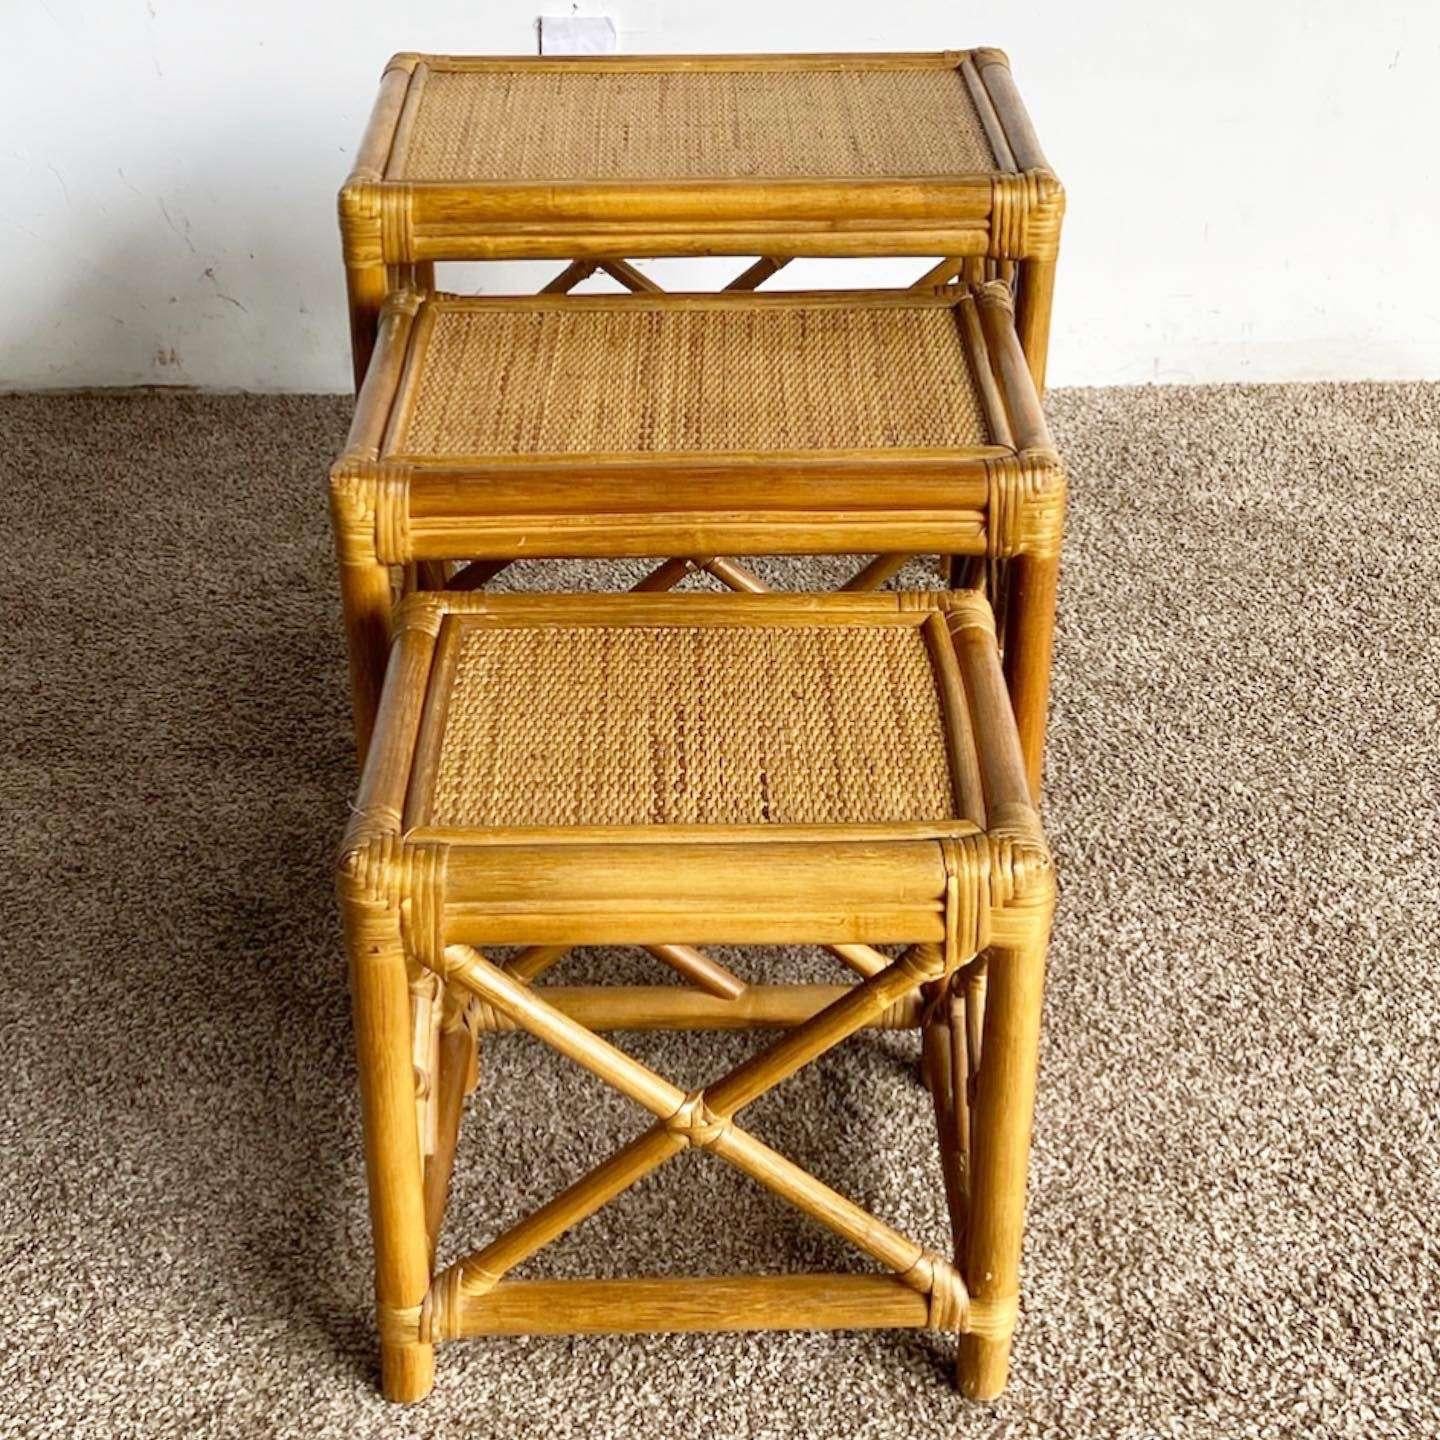 Boho Chic Chippendale Bamboo Rattan and Wicker Nesting Tables - Set of 3 In Good Condition For Sale In Delray Beach, FL